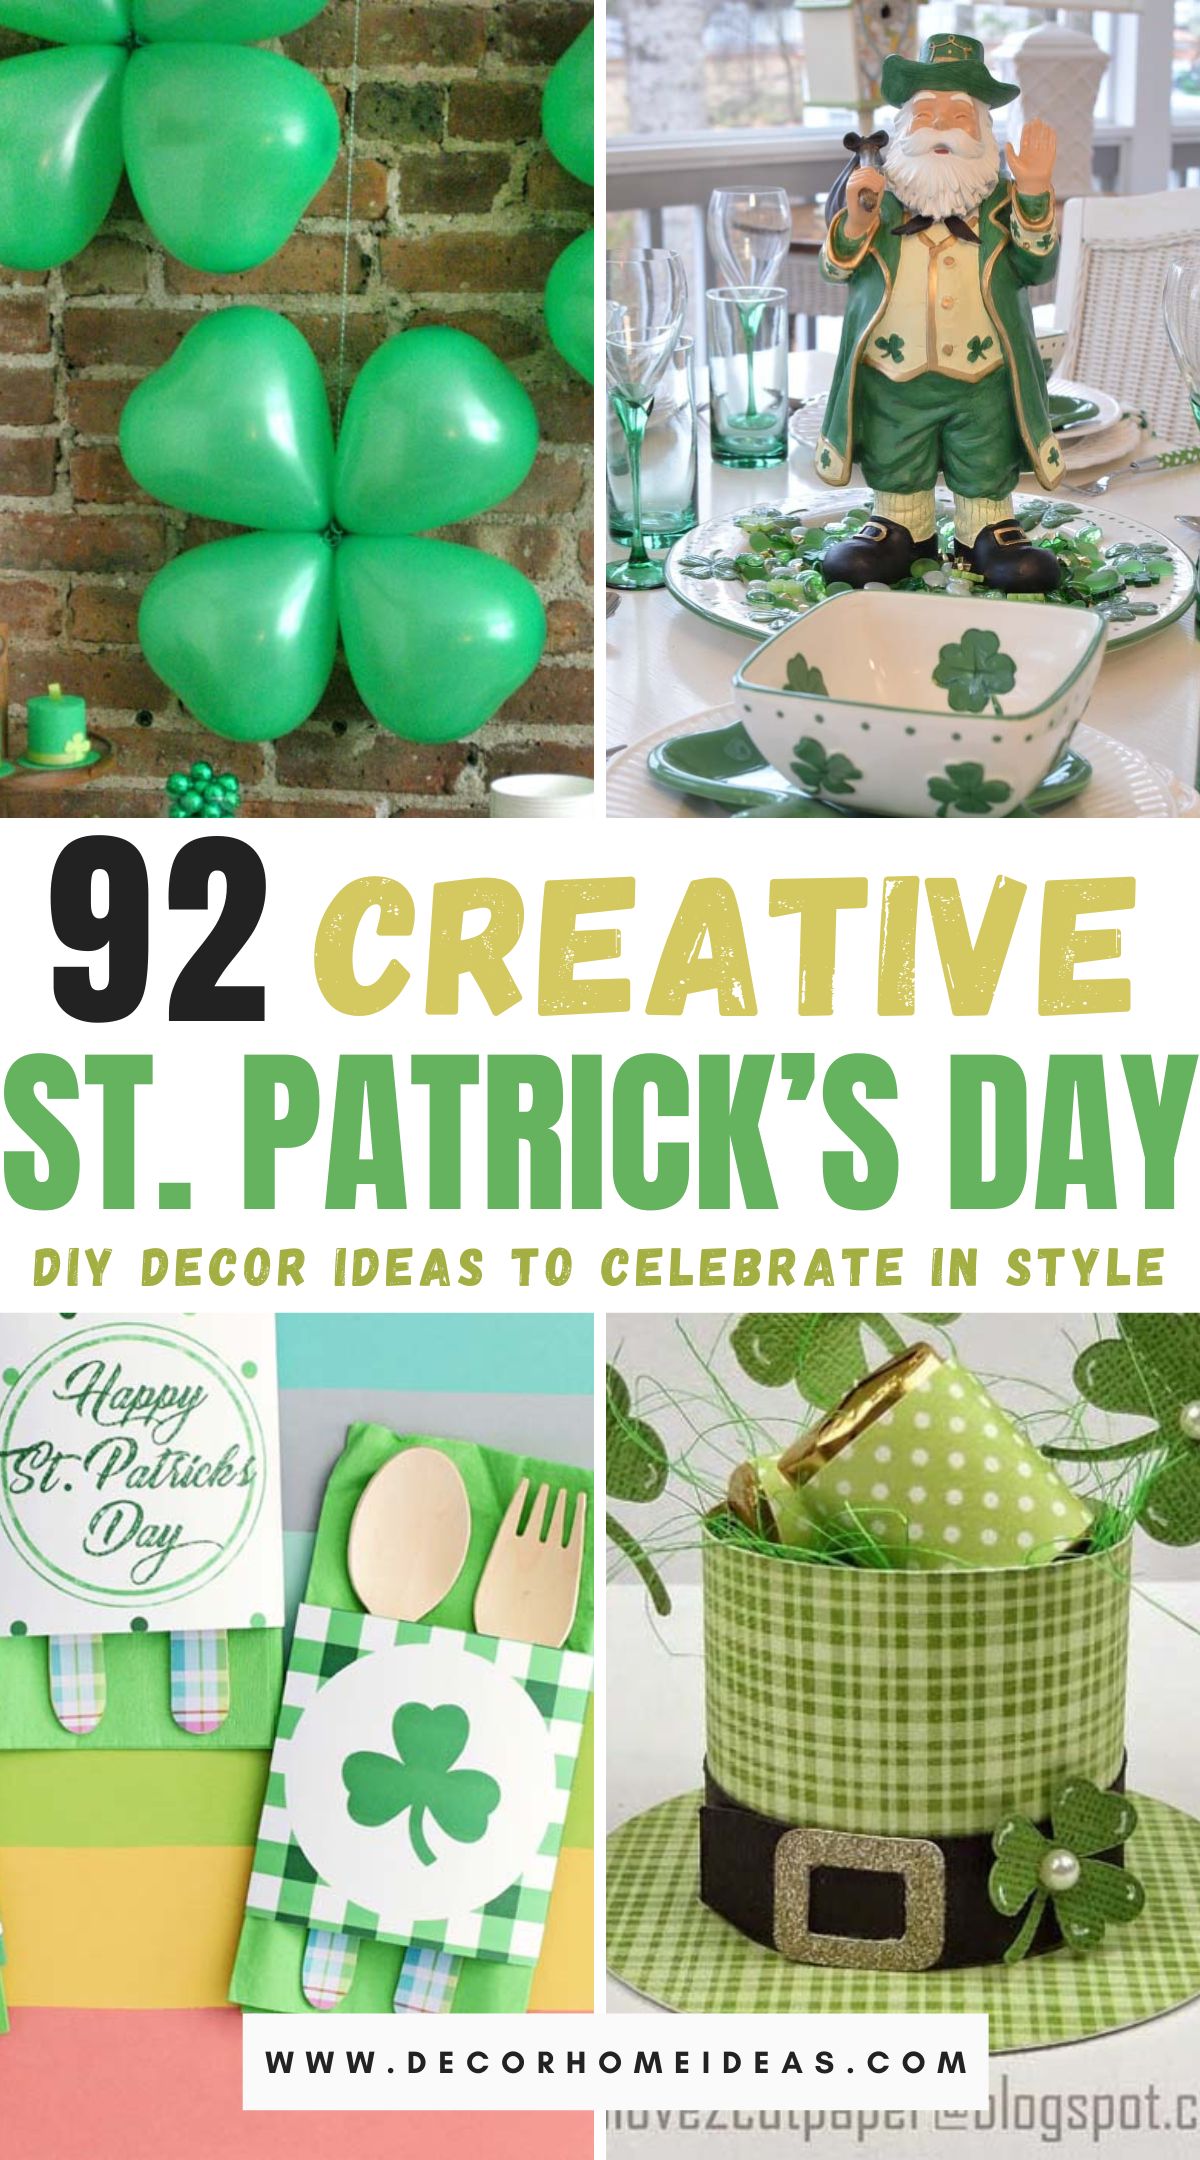 Celebrate St. Patrick's Day in style with these 92 creative DIY decor ideas. From festive wreaths to charming table settings, explore a plethora of inspiring projects to infuse your home with Irish spirit and make this holiday one to remember.